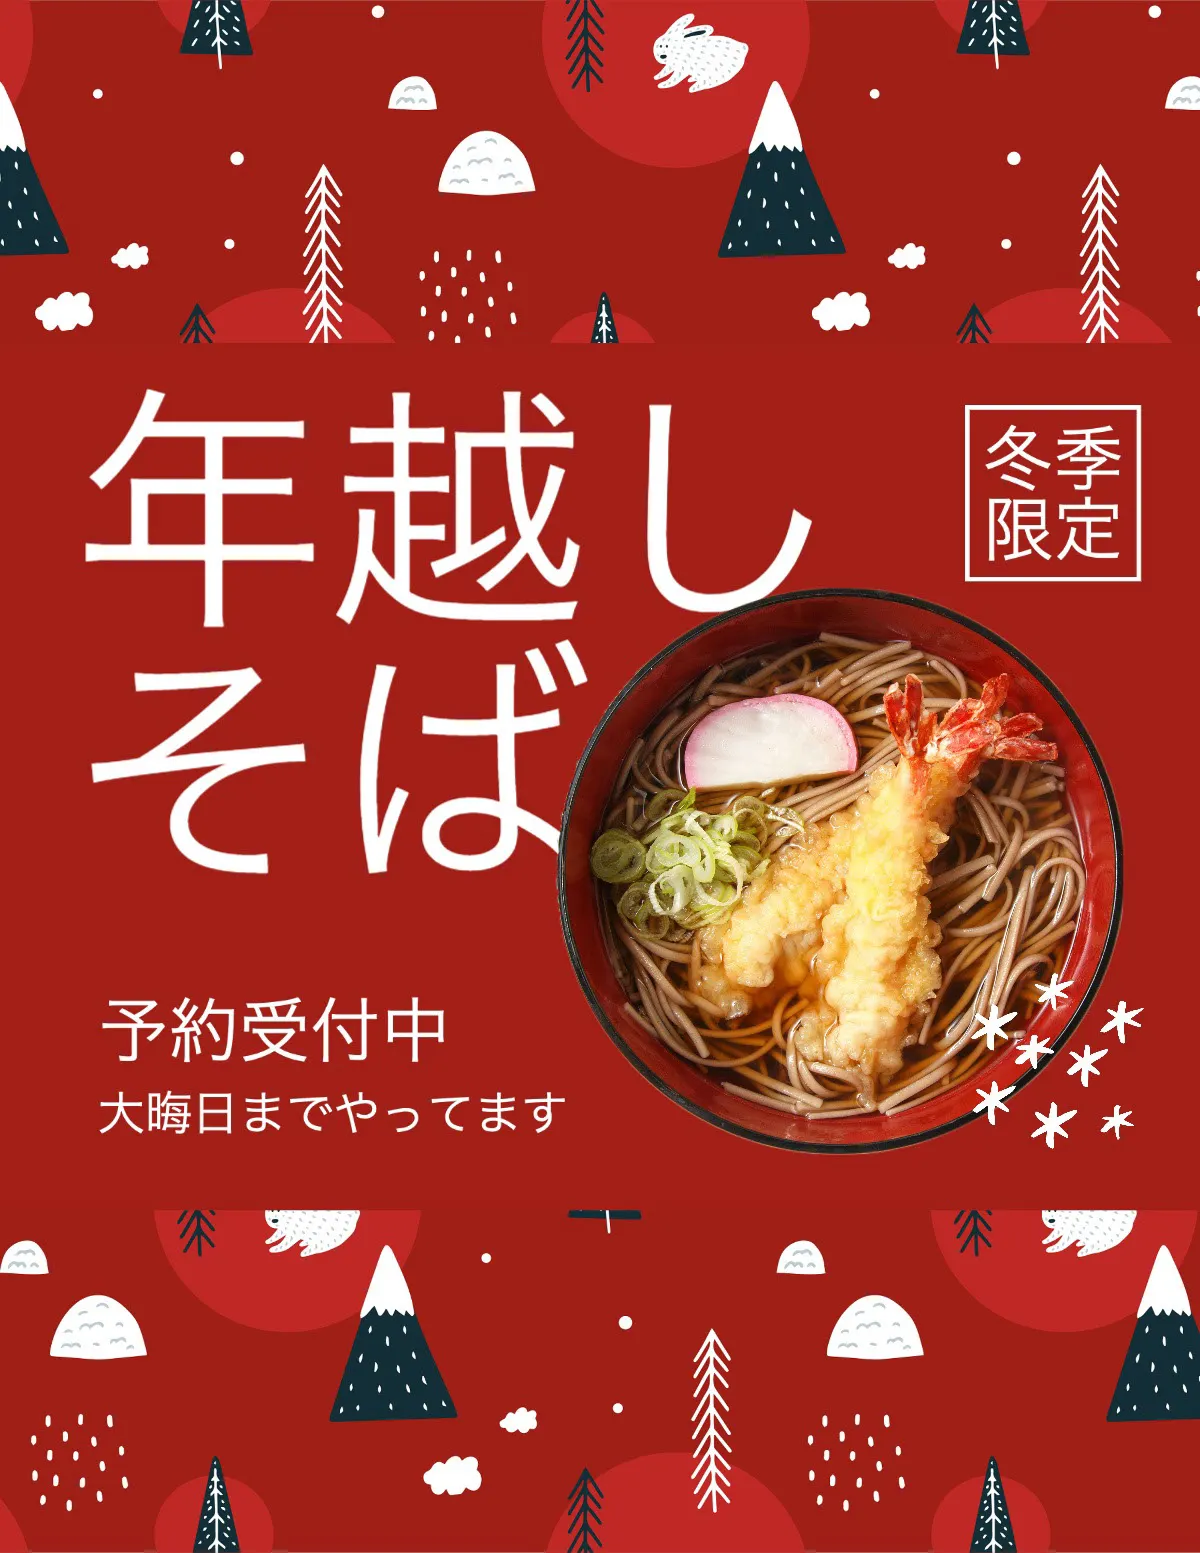 New year eve soba red reserve